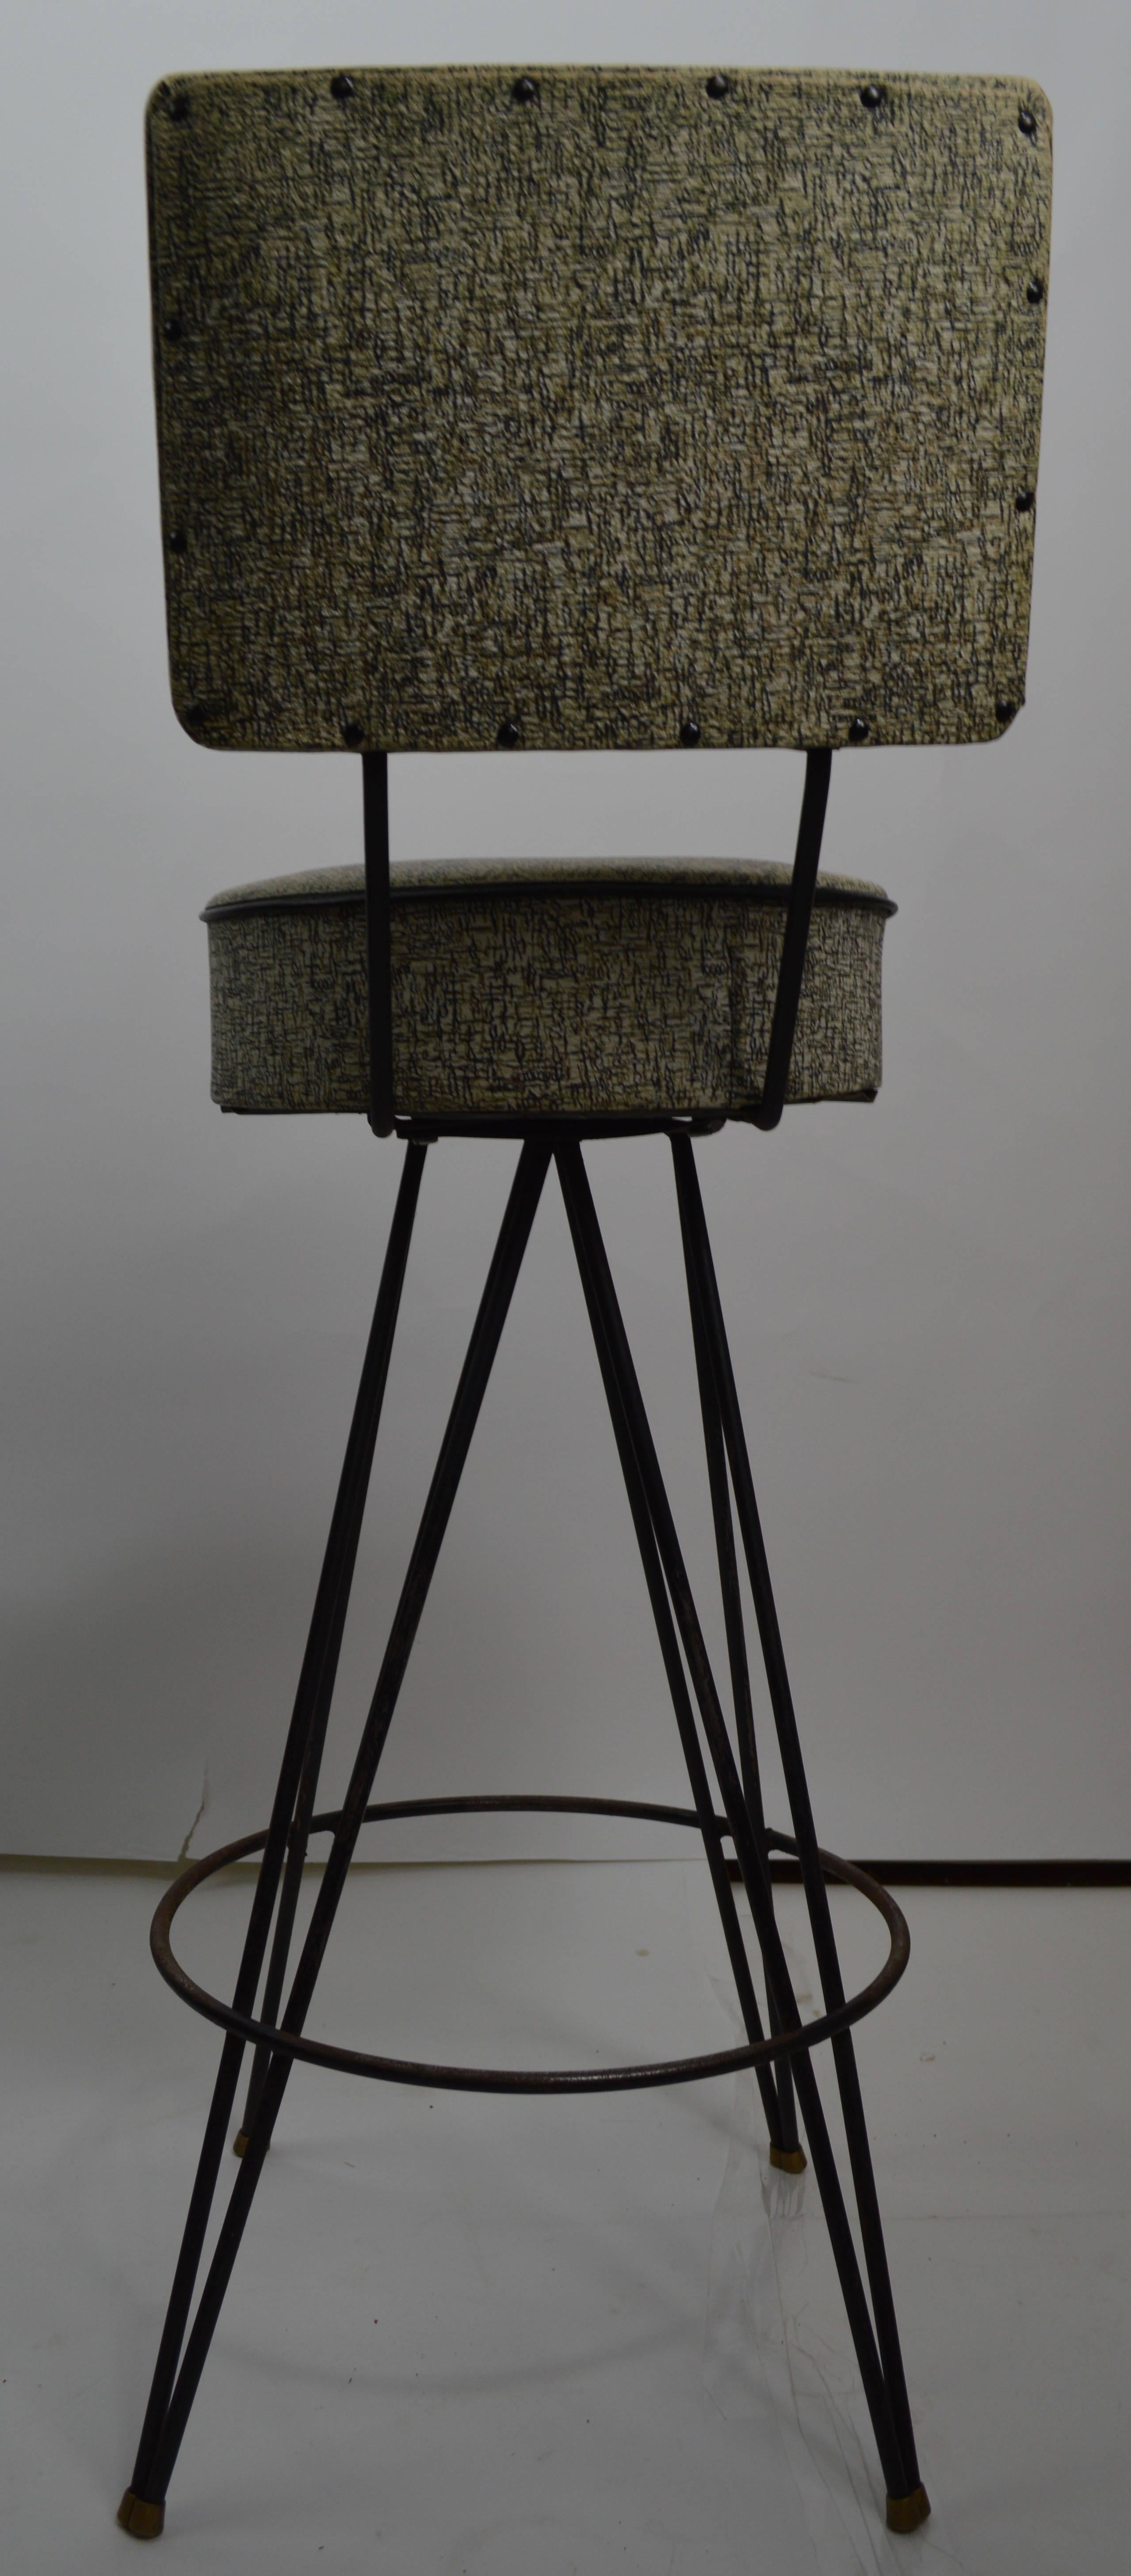 Upholstery Set of Four Stools with Removable Backs